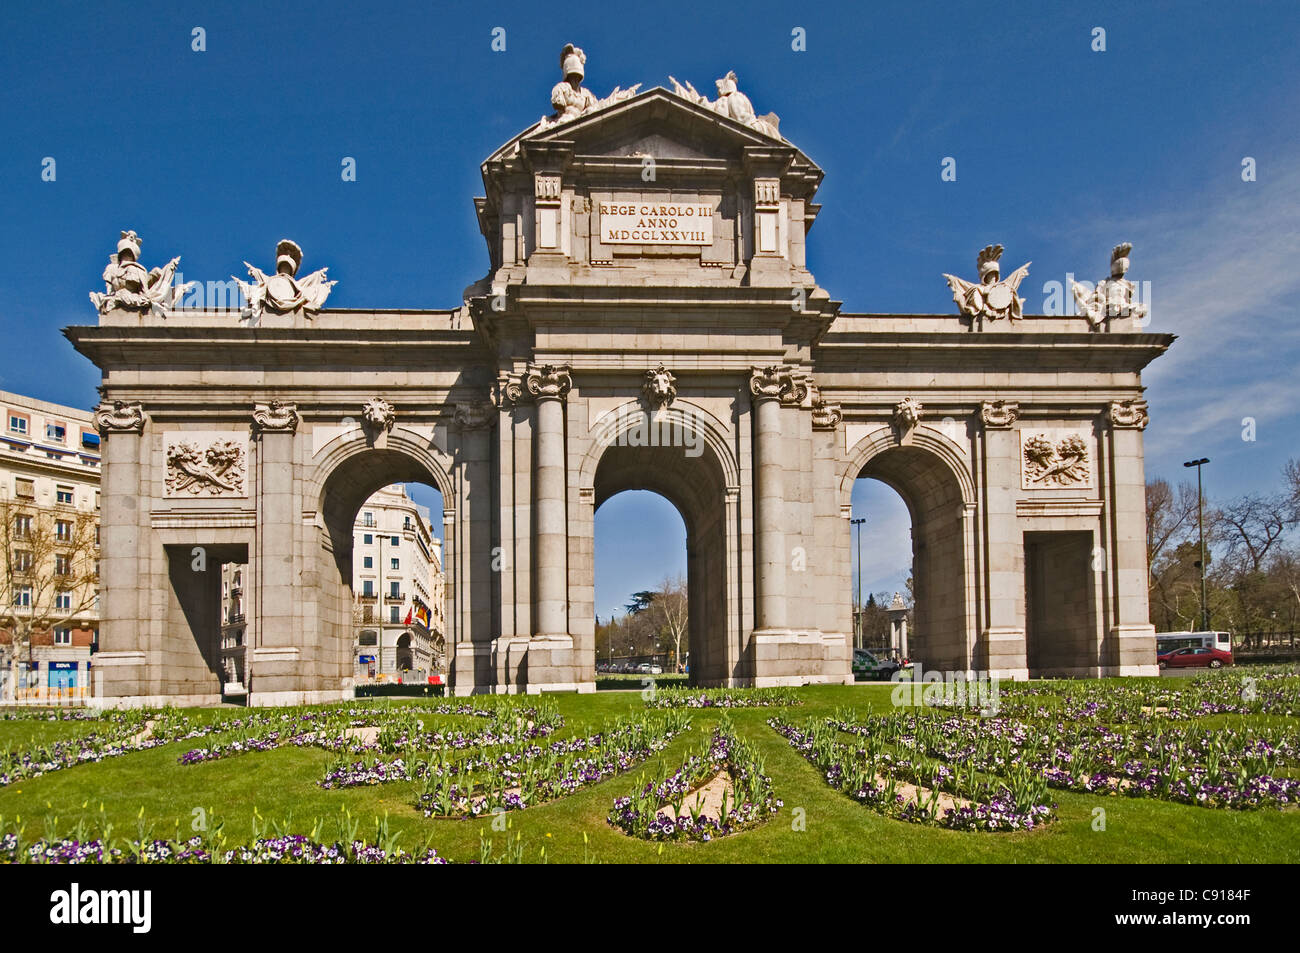 The Puerta de Alcala is a neoclassical monument in the Plaza Independencia. Stock Photo